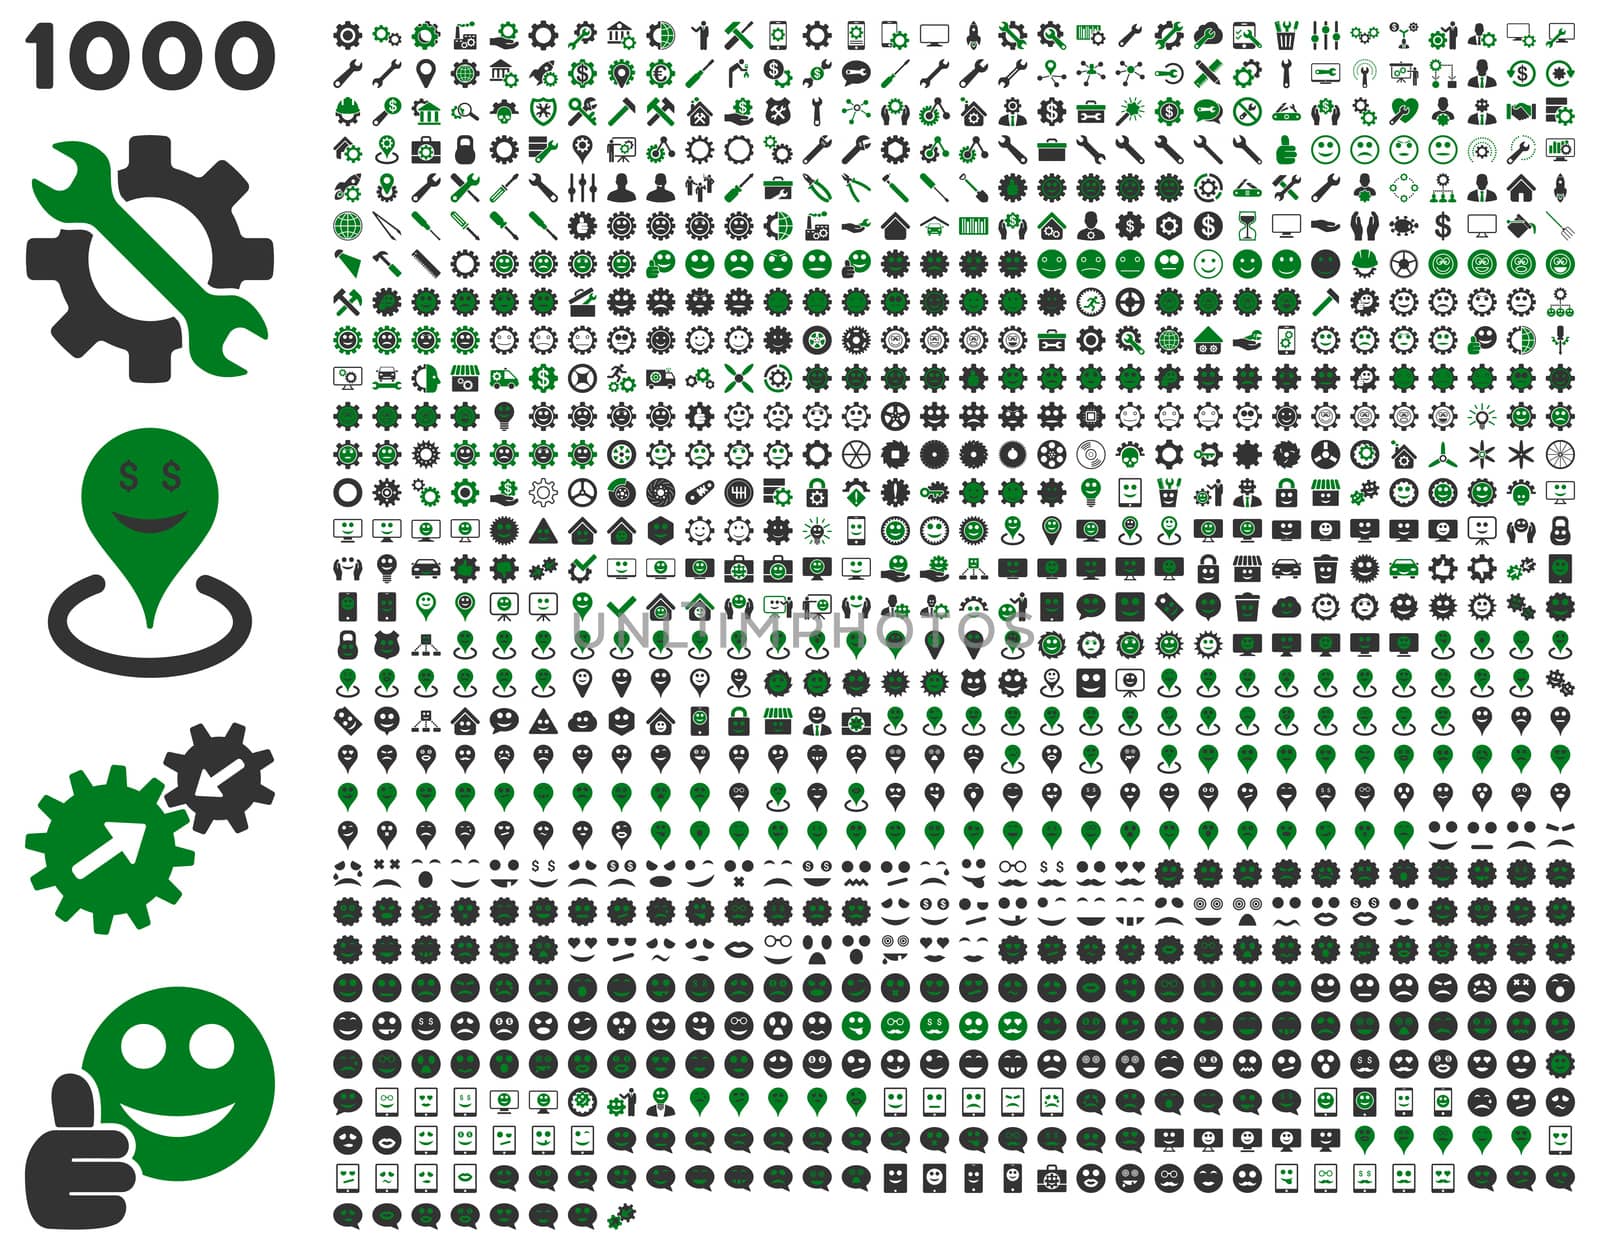 1000 tools, gears, smiles, map markers, mobile icons. Glyph set style: bicolor flat images, green and gray symbols, isolated on a white background.